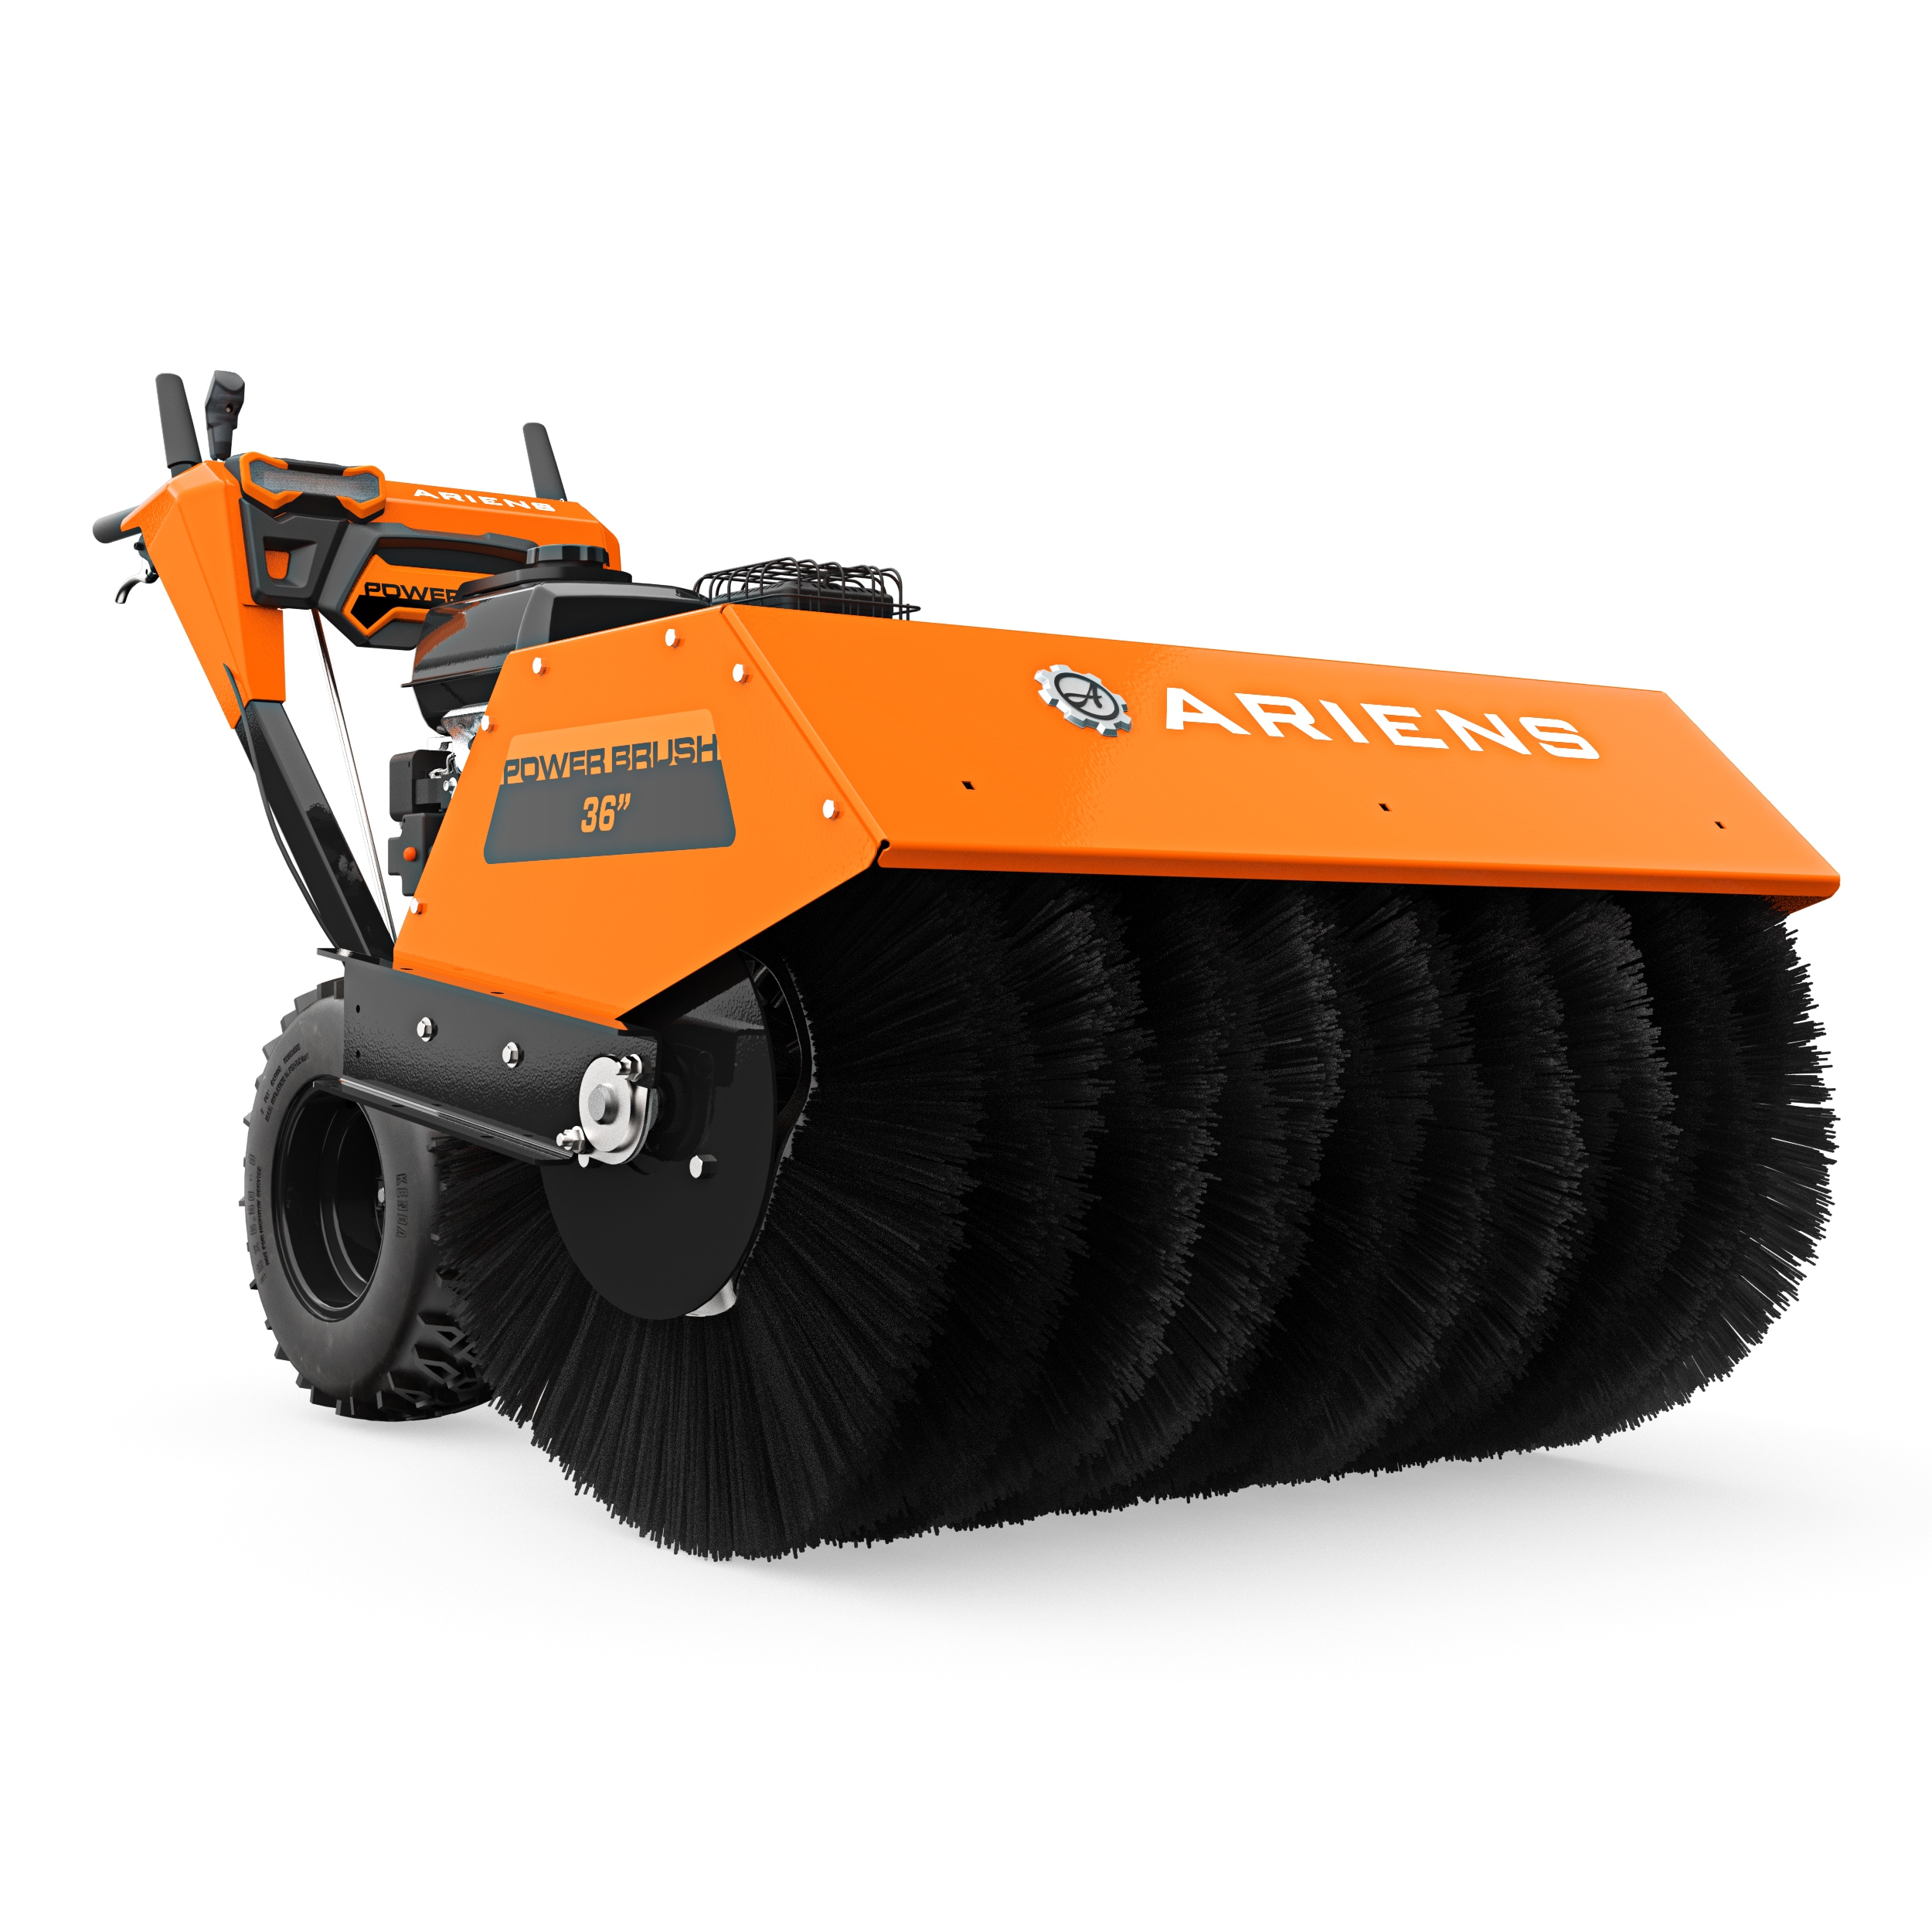 36"" Power Brush 36-in Two-stage Self-propelled Gas Snow Blower in Orange | - Ariens 926087